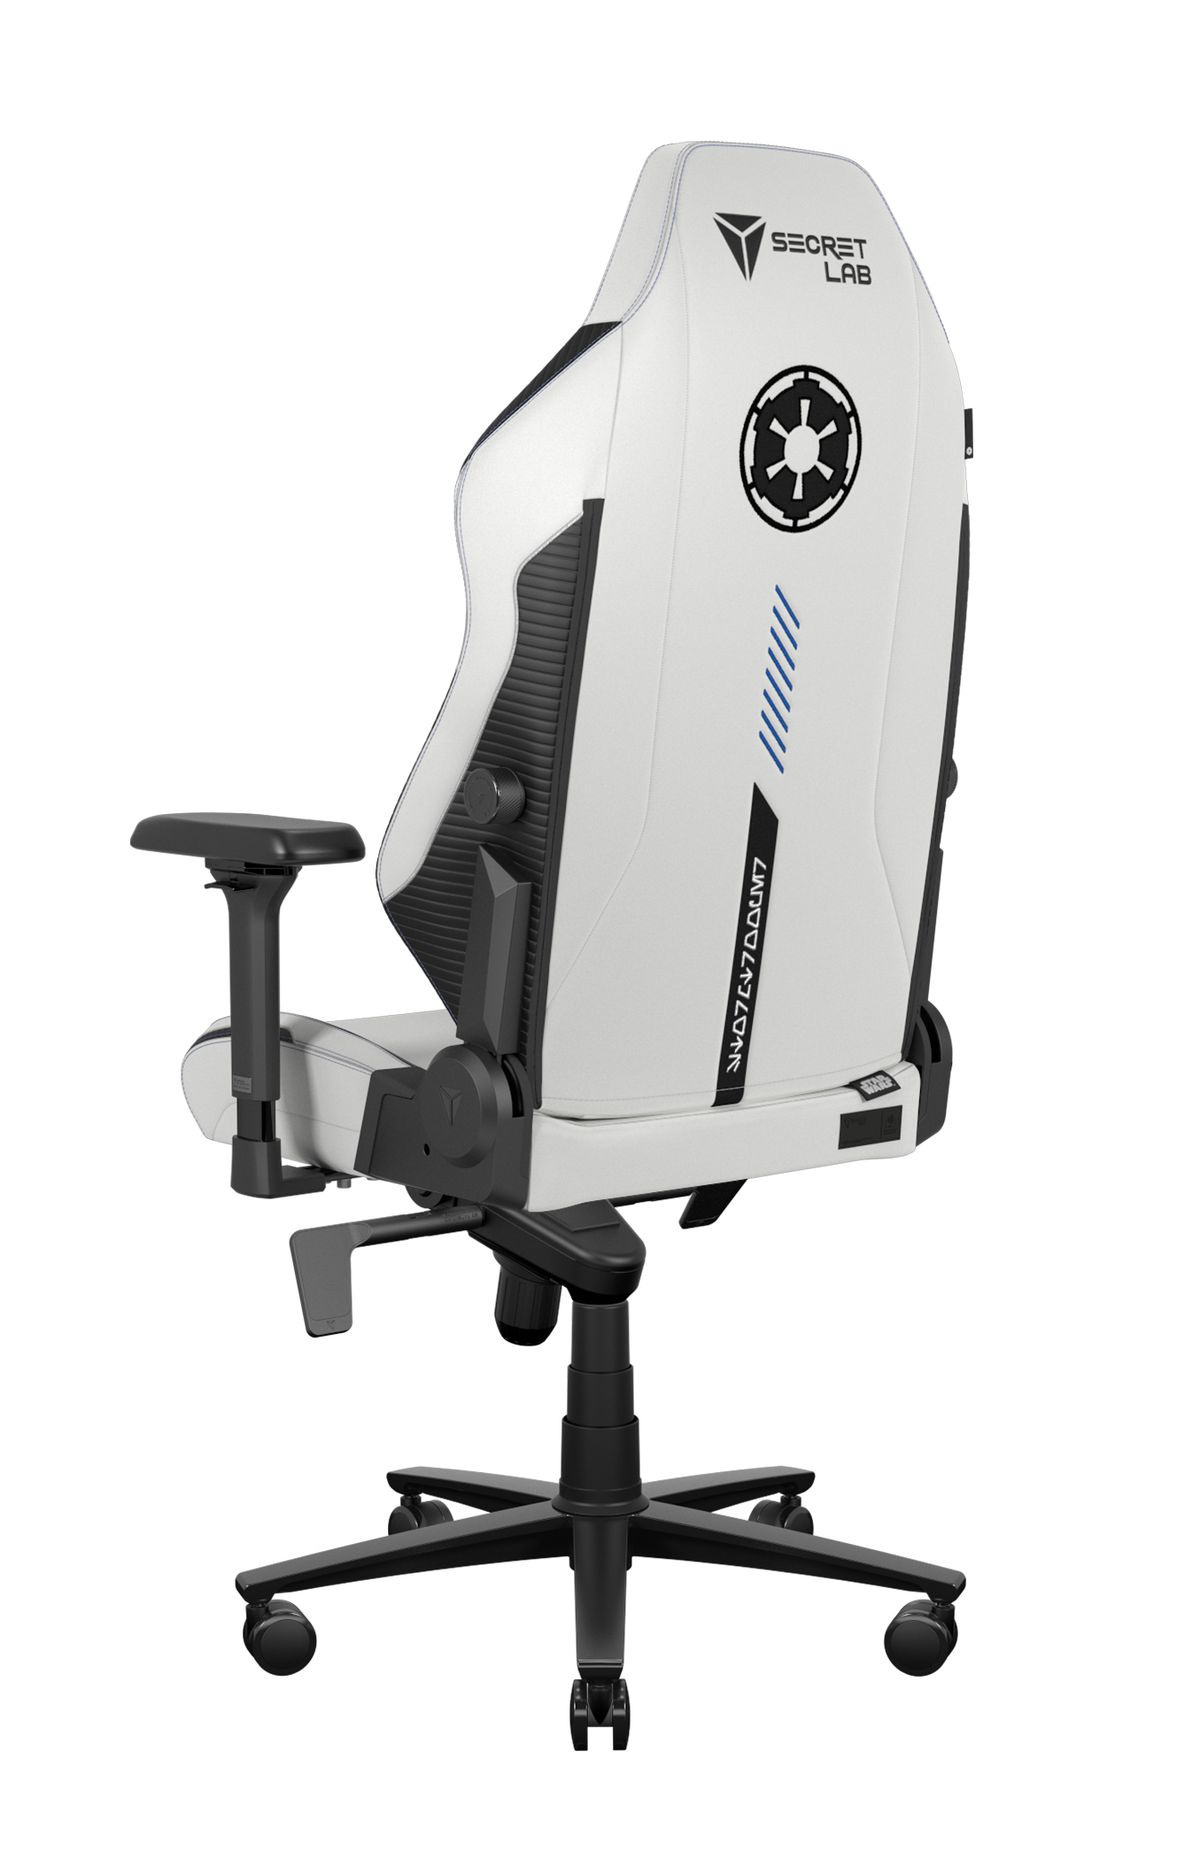 Image of a white and black Star Wars gaming chair.